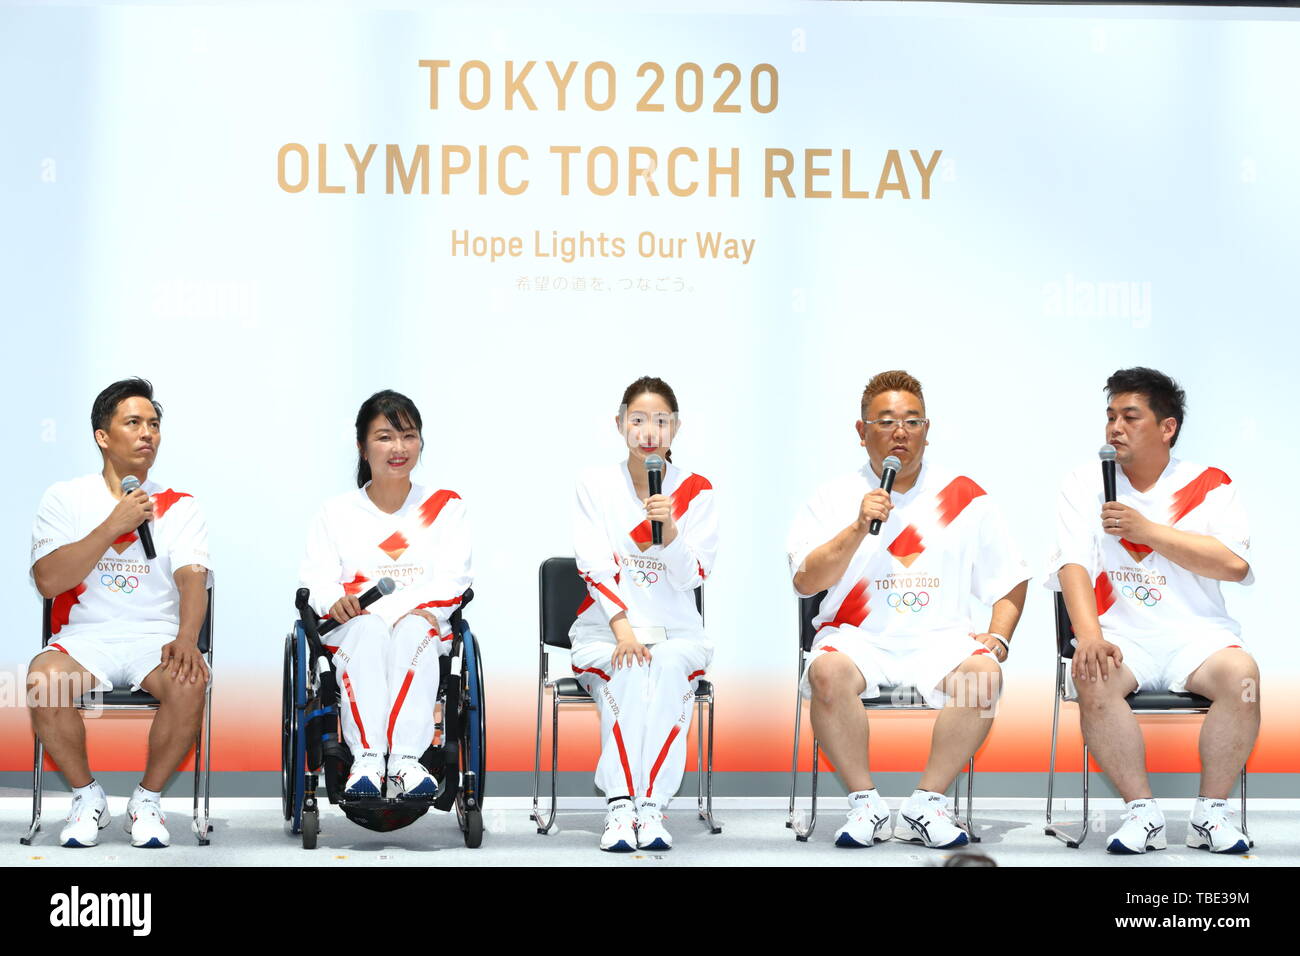 Tokyo, Japan. 1st June, 2019. (L-R) Tadahiro Nomura, Aki Taguchi, Satomi Ishihara, Mikio Date, Takeshi Tomizawa, The Tokyo Organising Committee of the Olympic and Paralympic Games (Tokyo 2020) holds commemorative event of Torch Relay in Tokyo, Japan on June 1, 2019, 300 days before of the Japanese leg of the Tokyo 2020 Olympic Torch Relay starts. The Organising Committee unveiled an official uniform, course outline and applicant guidelines for Torch Relay Runners. Credit: Naoki Nishimura/AFLO SPORT/Alamy Live News Stock Photo